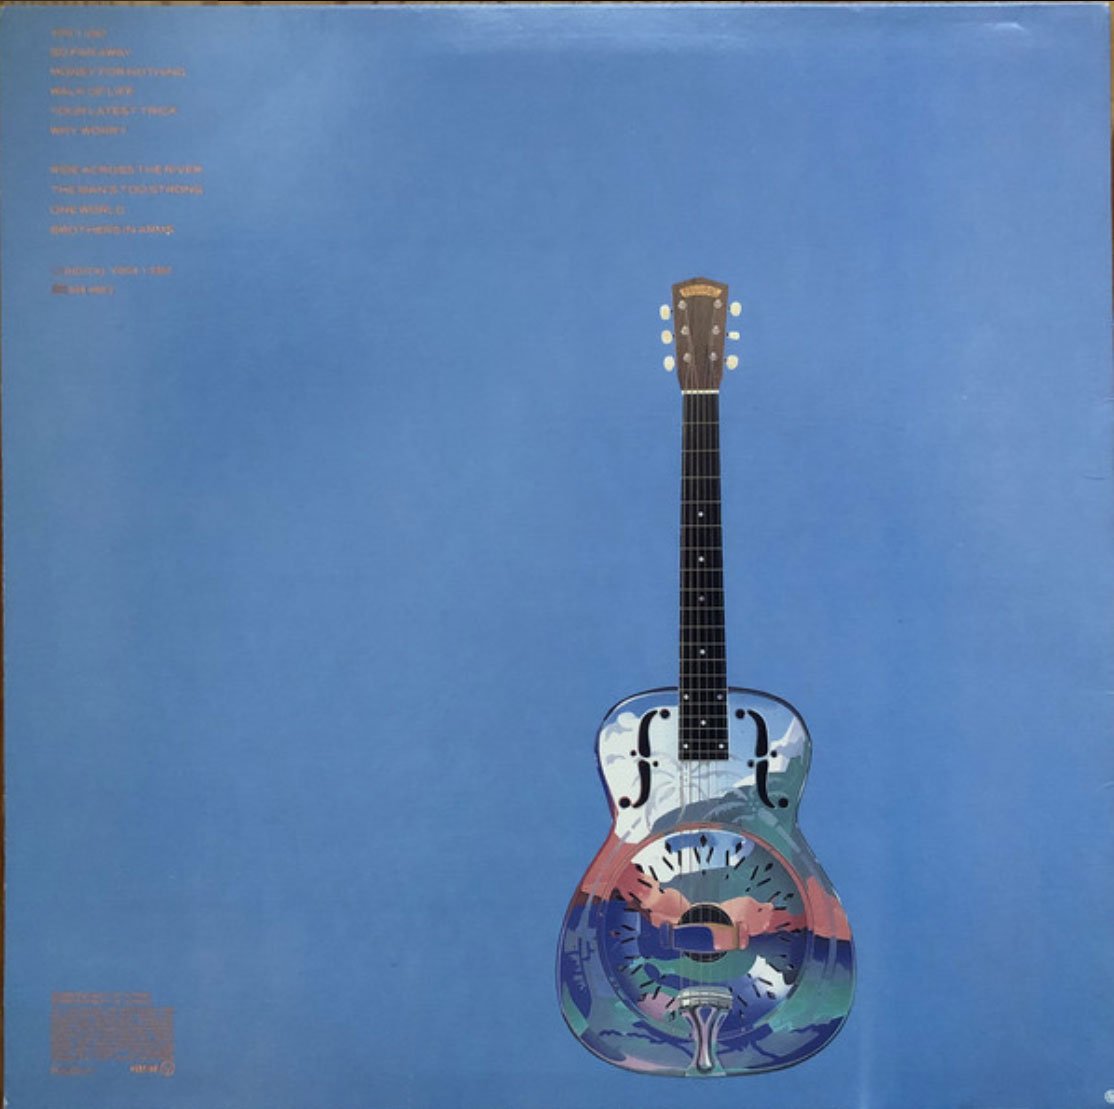 Dire Straits ‎– Brothers In Arms - 1985 Pressing